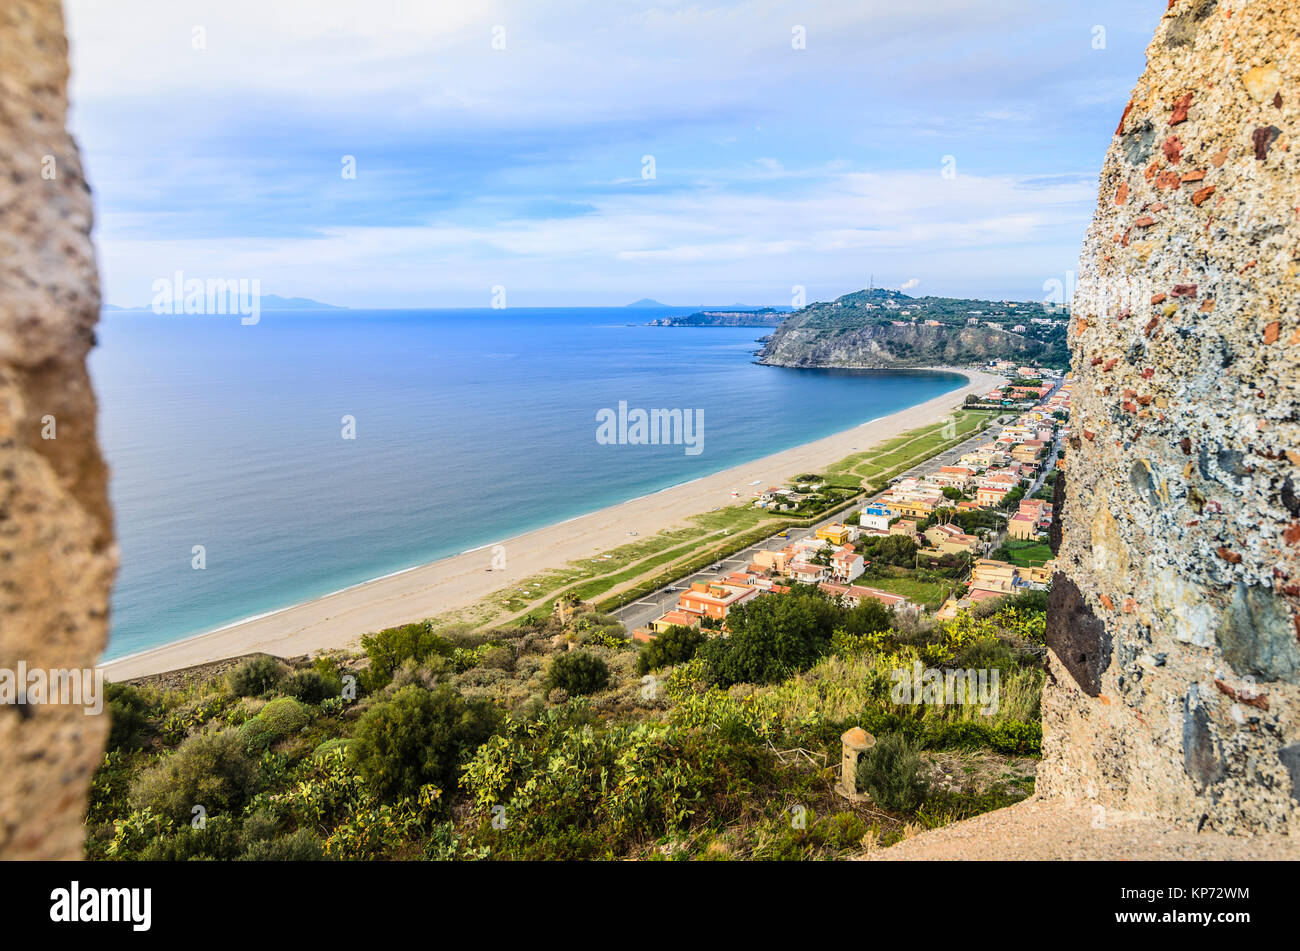 Defenses of the Norman castle of milazzo coastline with beaches of the Tyrrhenian Sea and on the horizon you can get to see the outline of the Aeolian Stock Photo